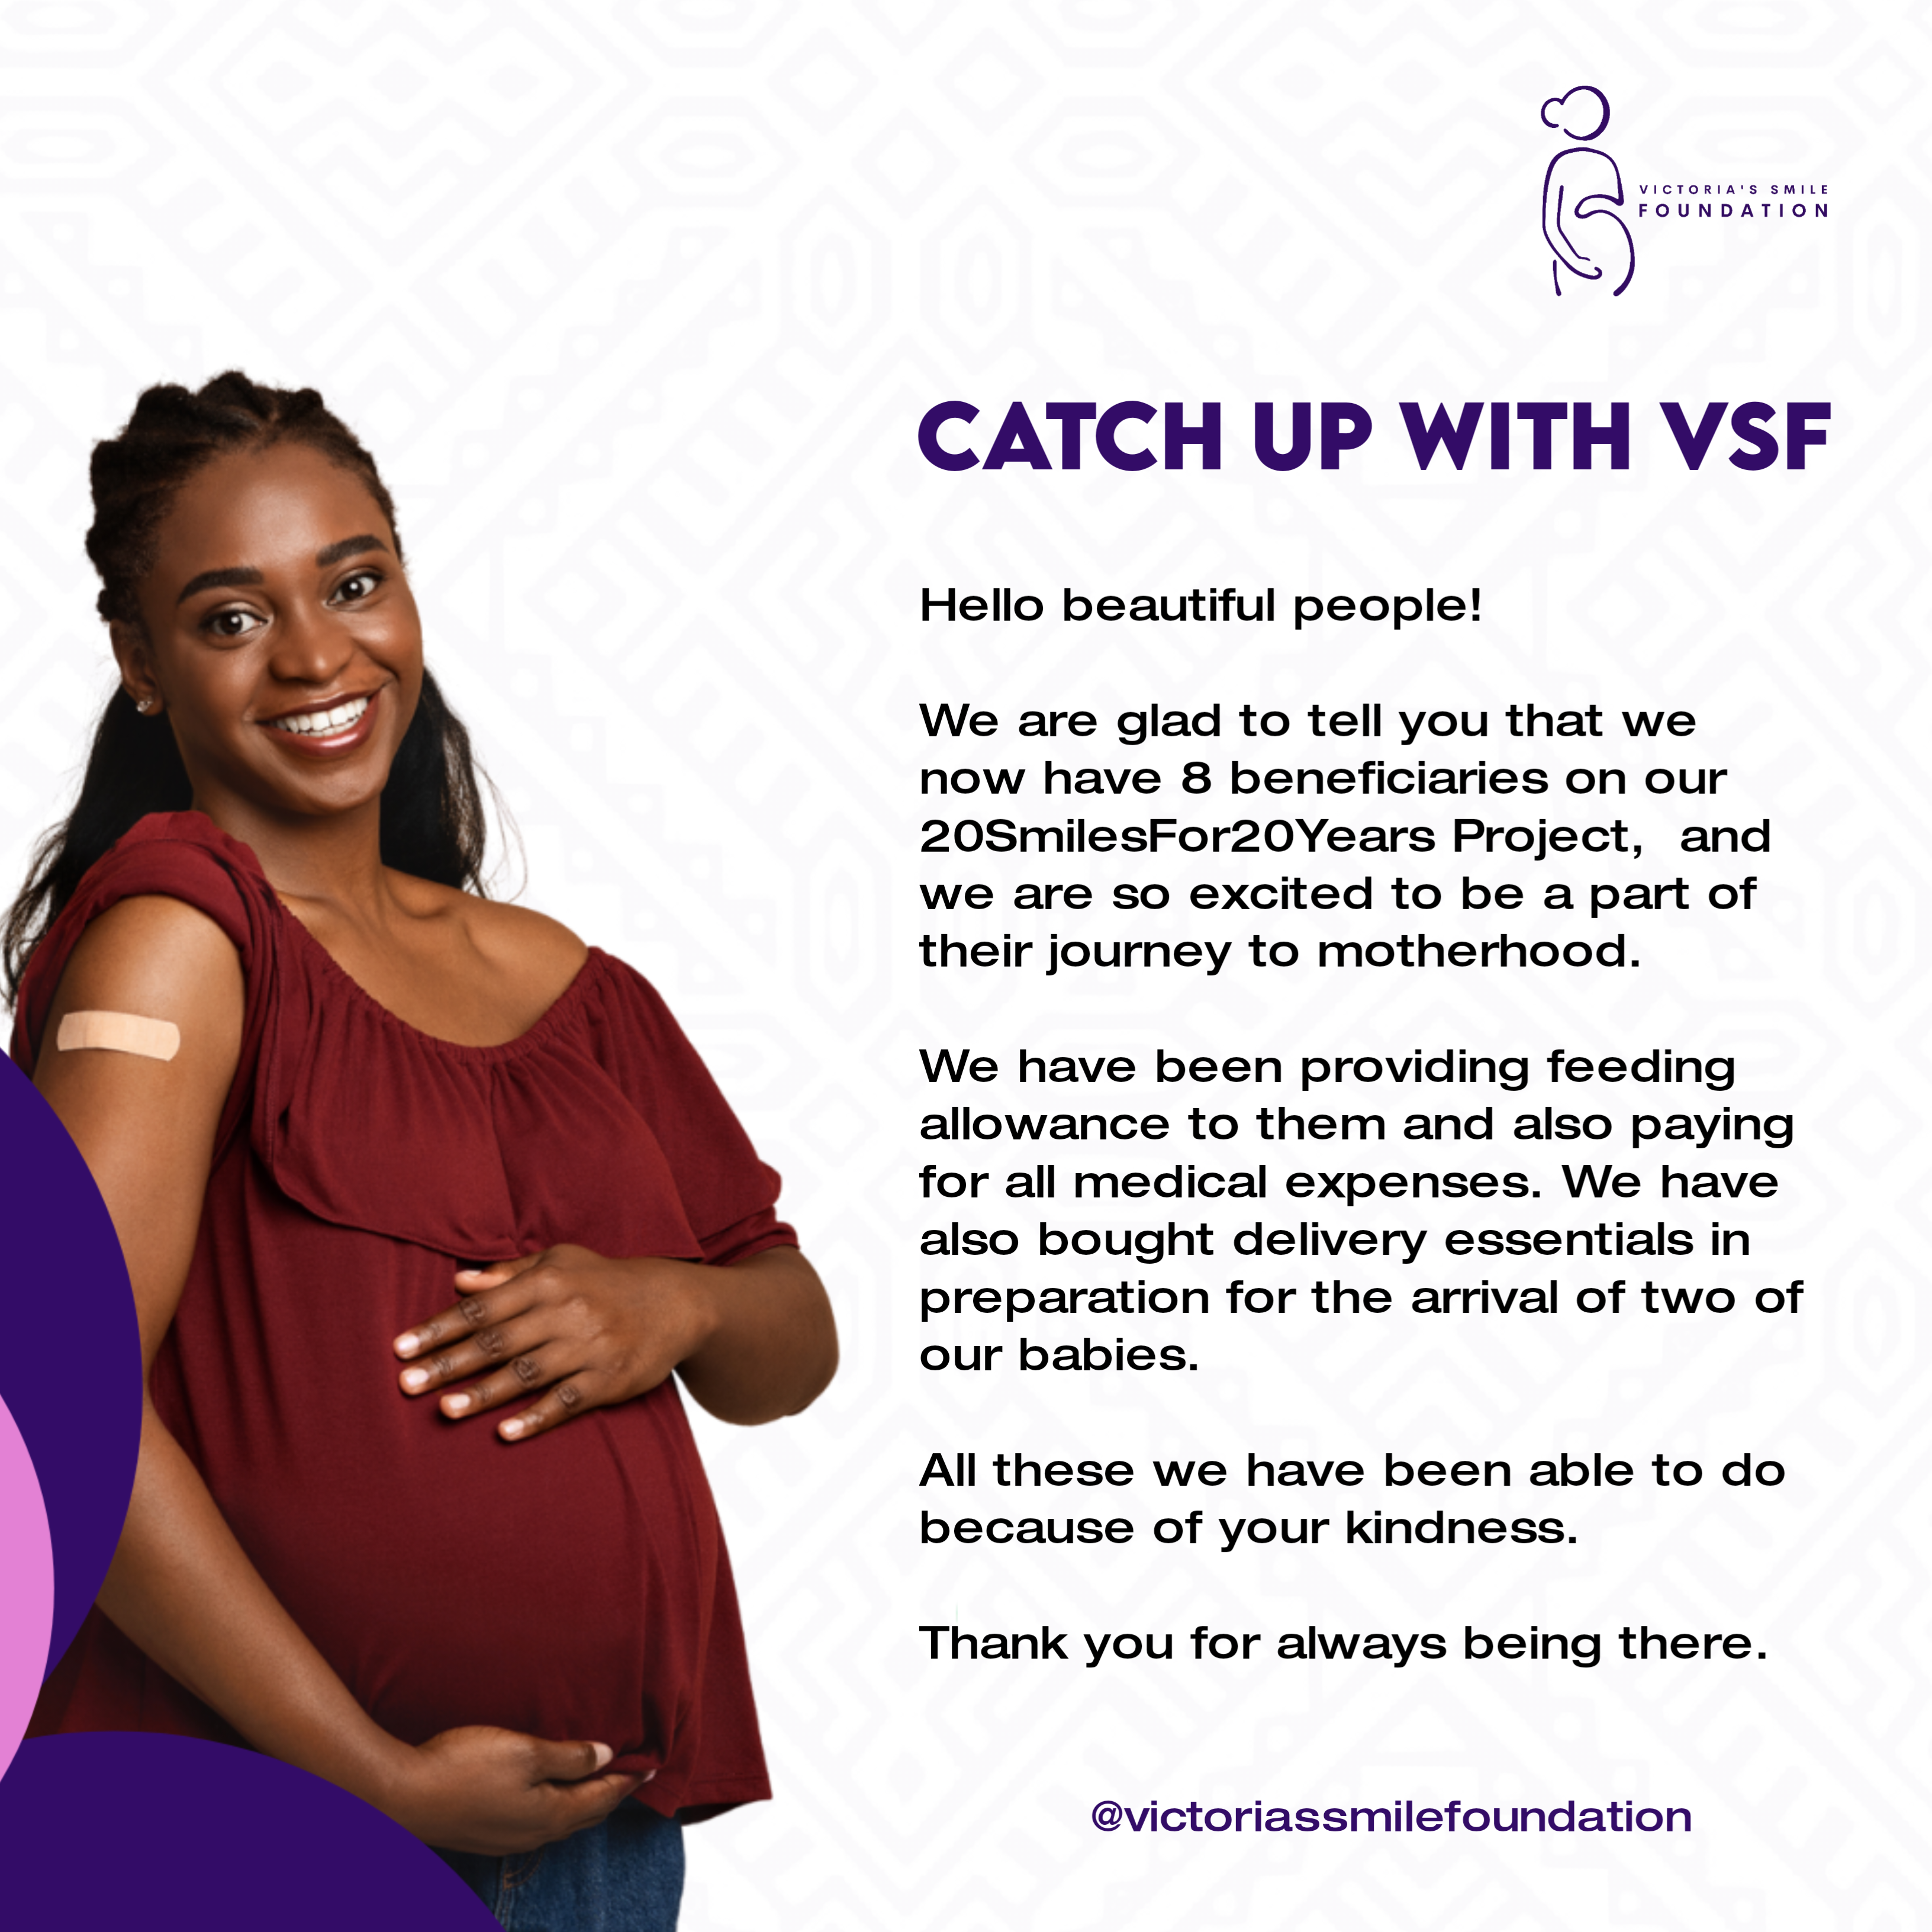 Catch up with VSF